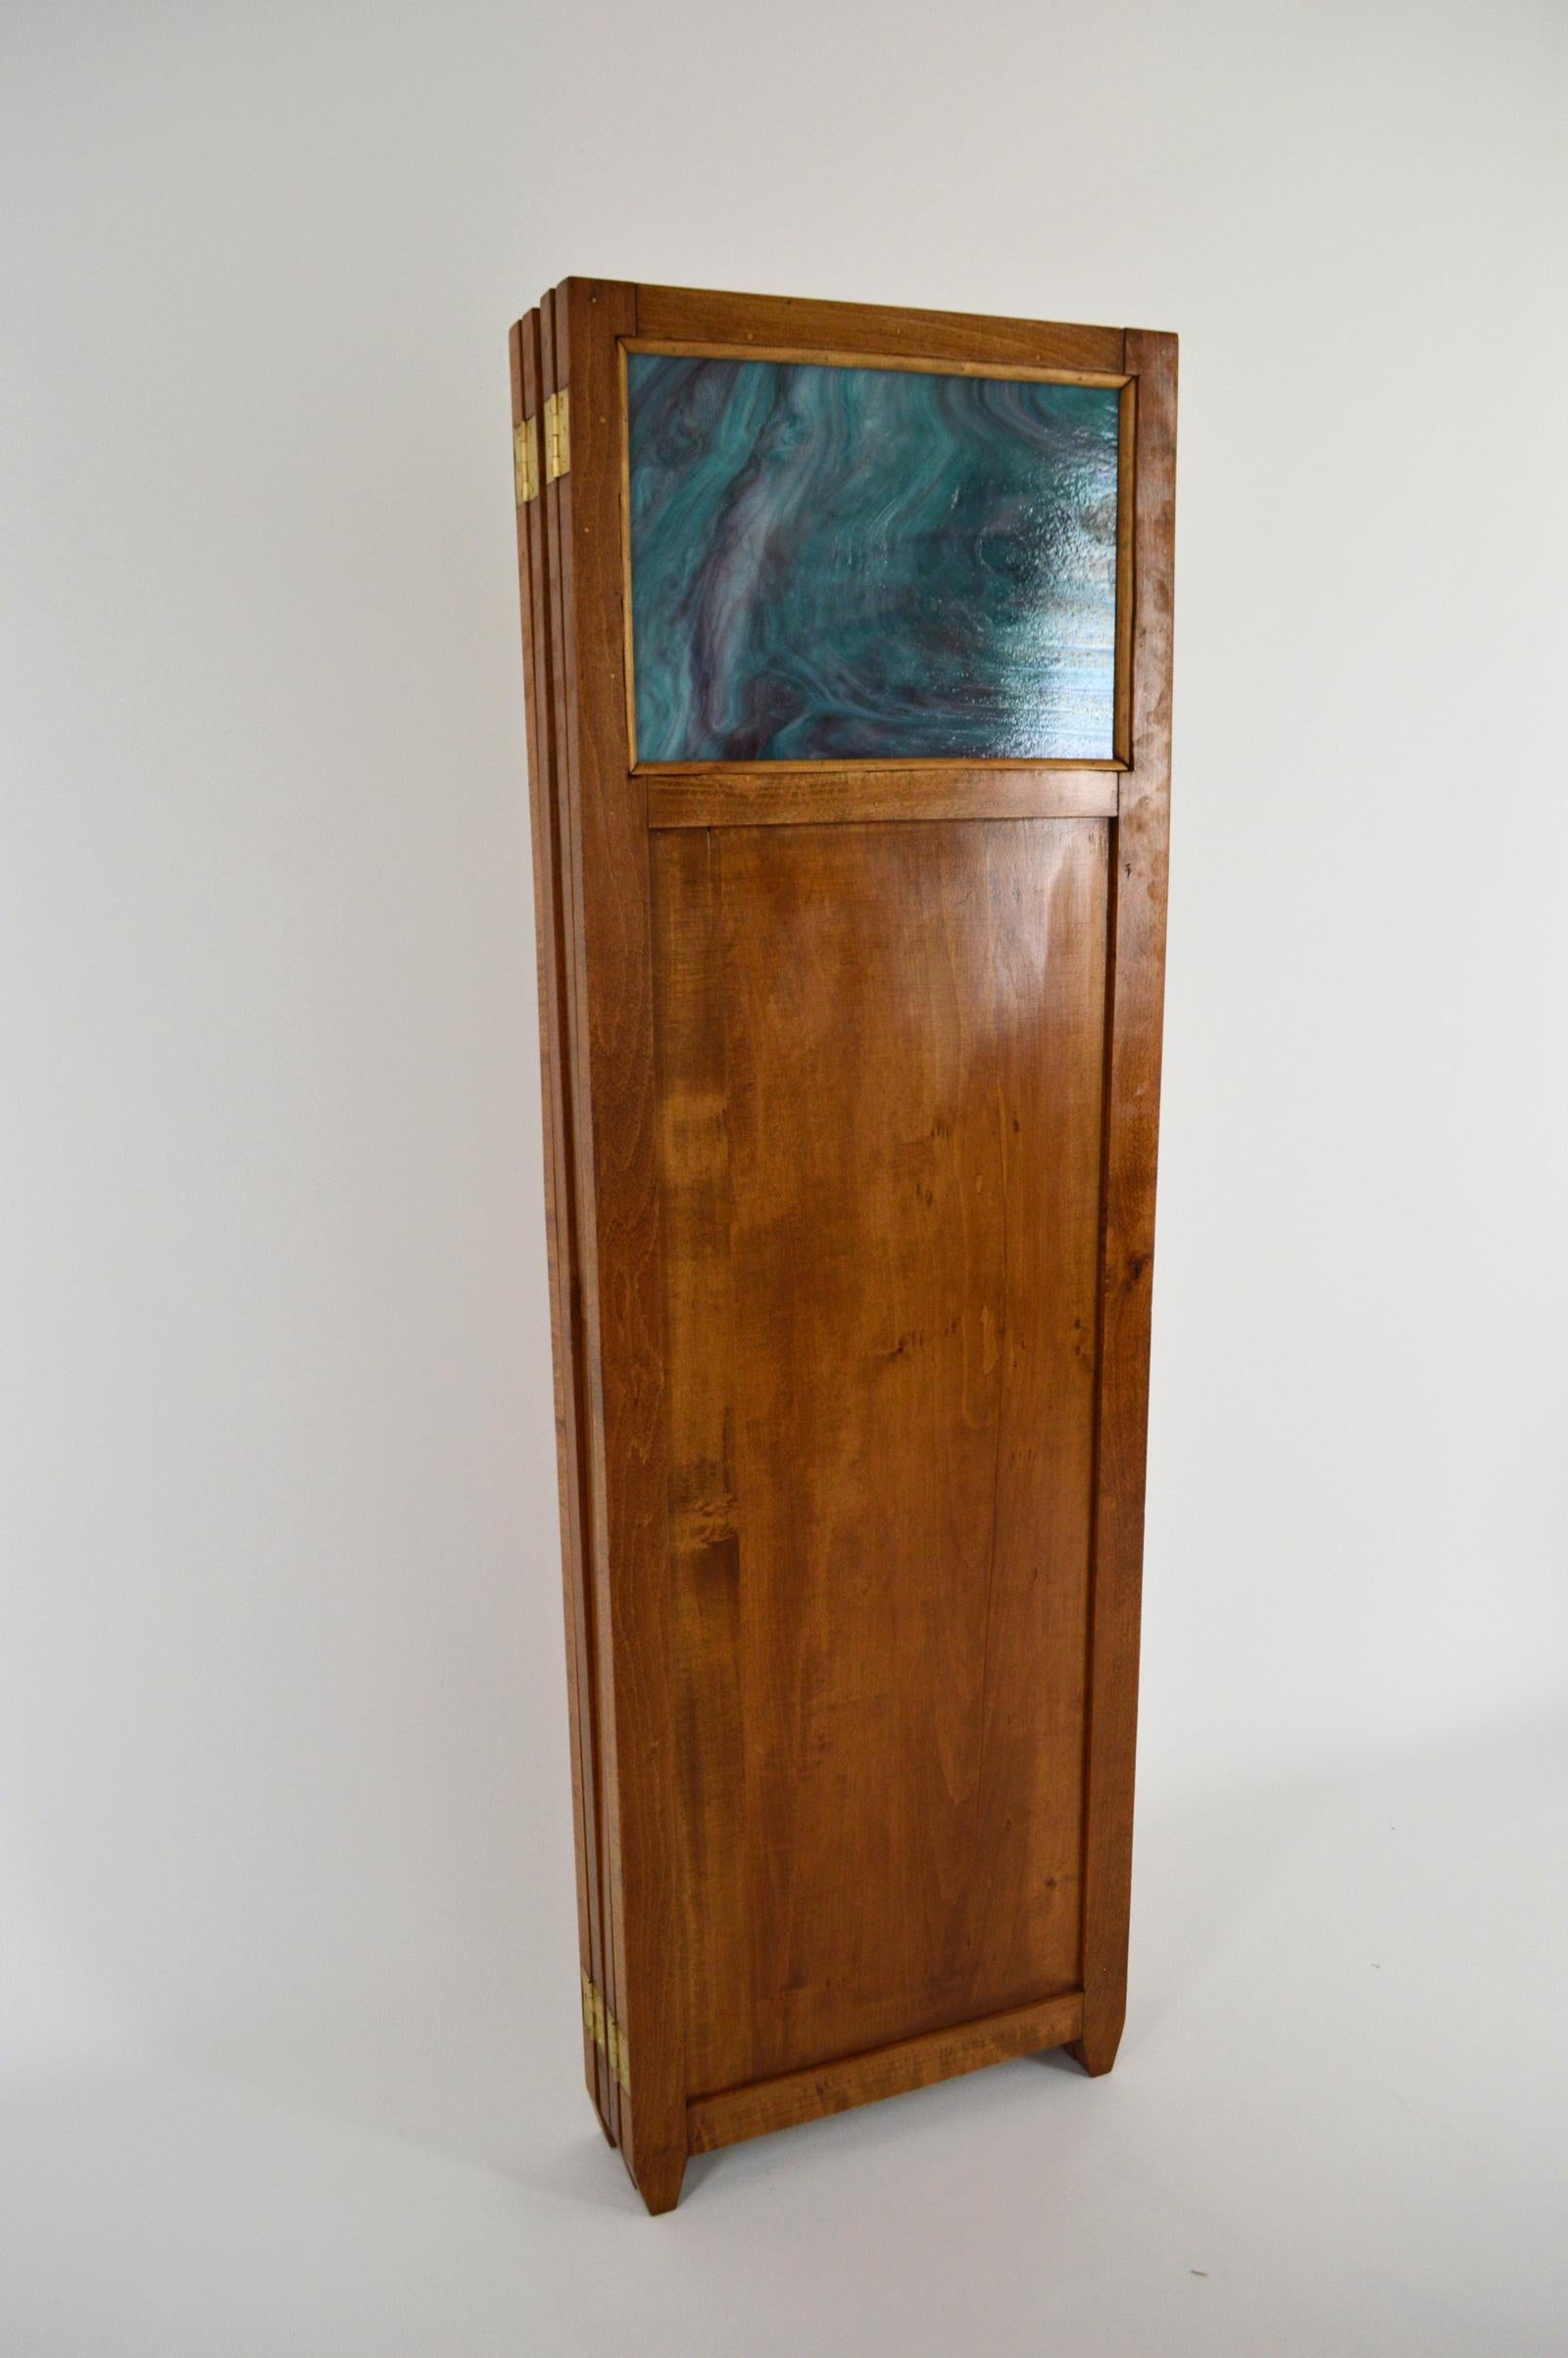 Art Nouveau Four-Panel Folding Screen, Pyrographed Wood & Stained Glass, 1910s For Sale 10